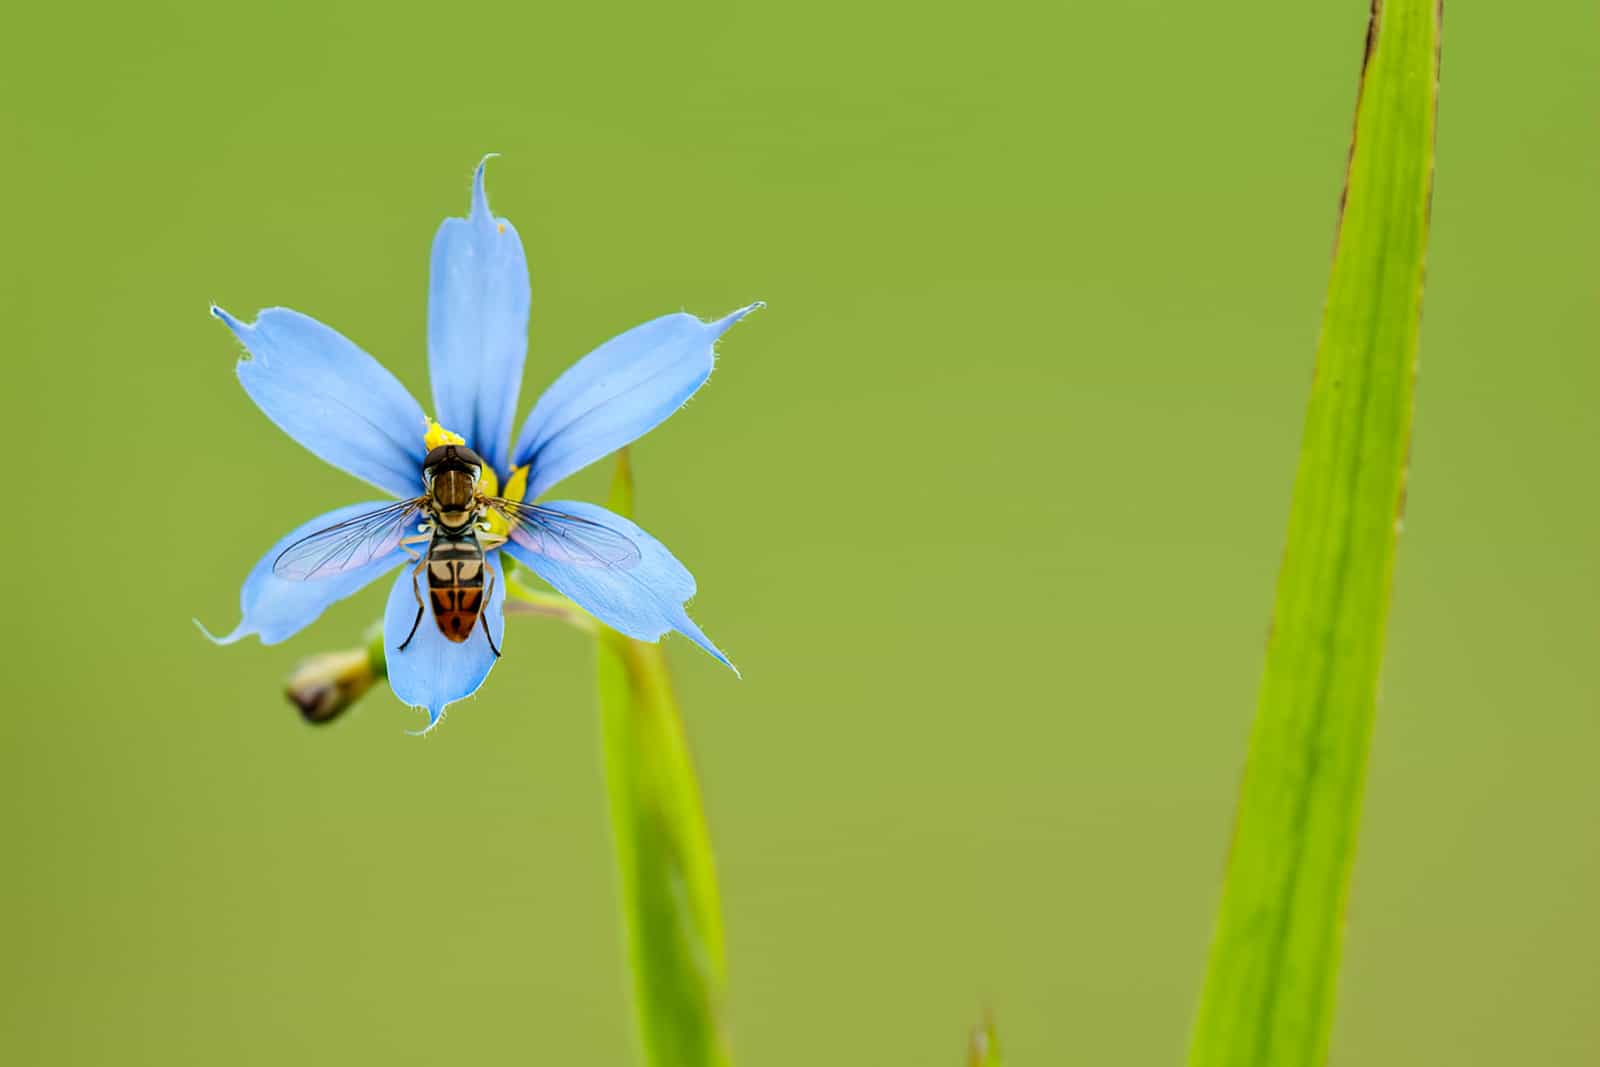 Syrphid fly (fam. Syrphidae) nectaring on blossom of blue-eyed grass